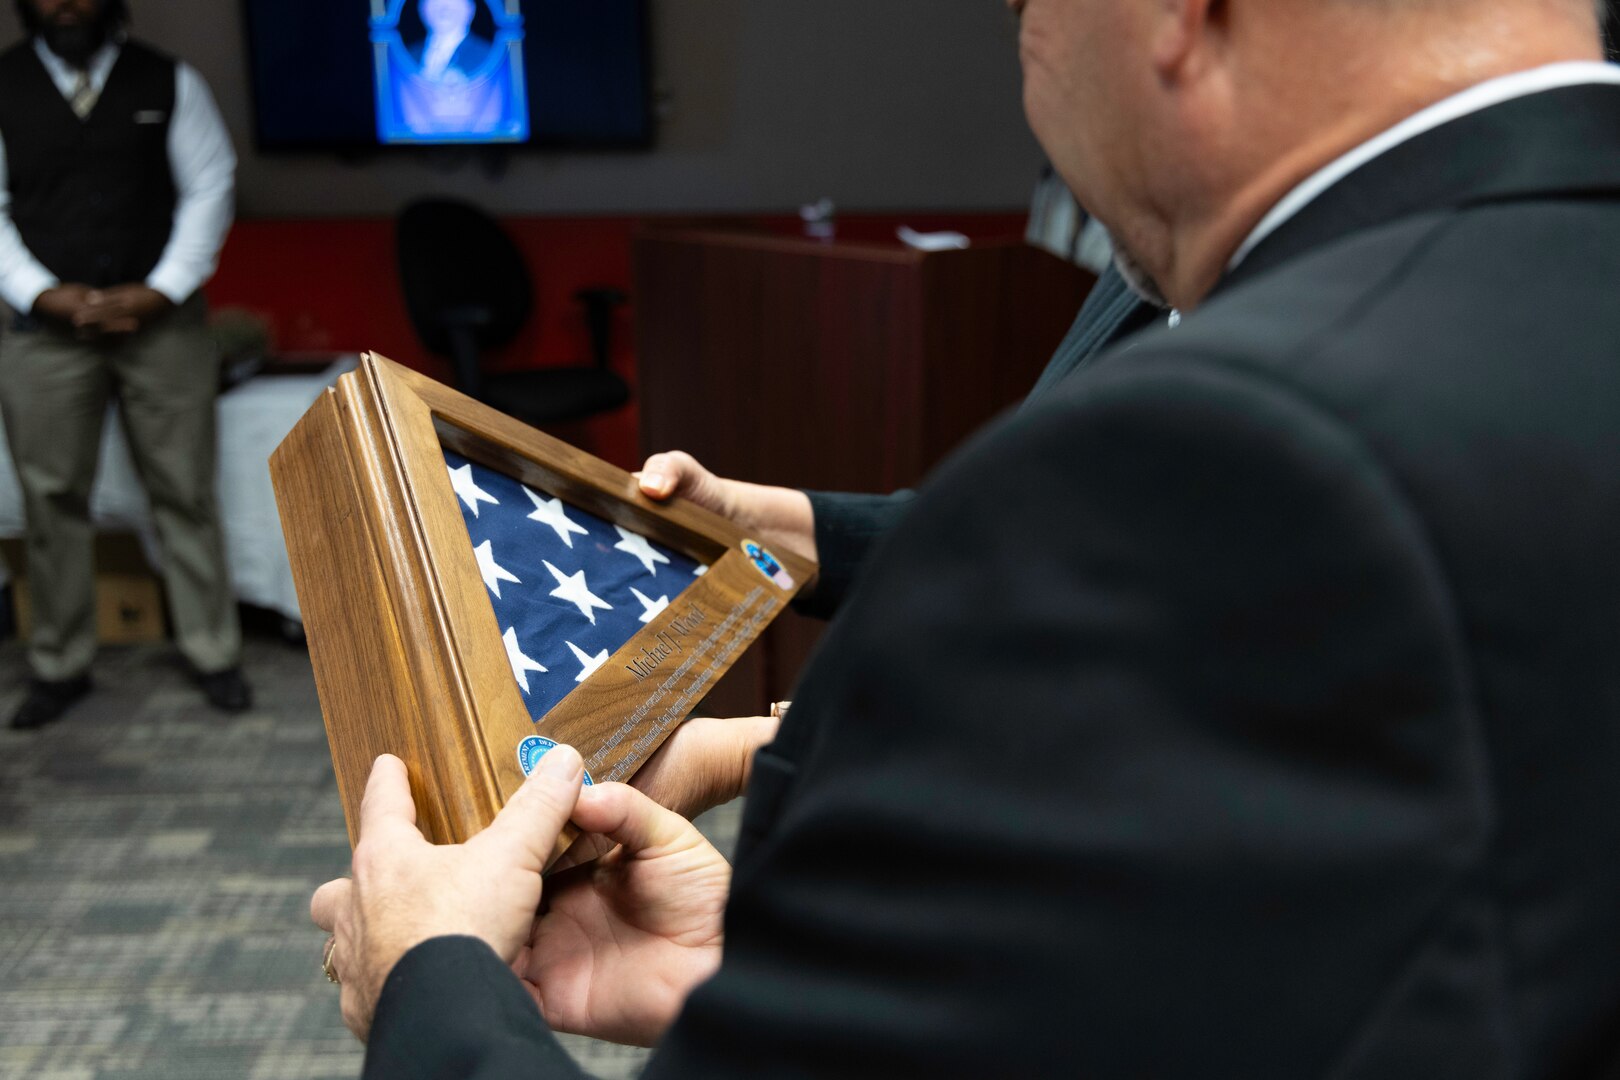 A light skinned man in a dark suit with graying hair looks at a U.S. Flag encased in a light brown box.